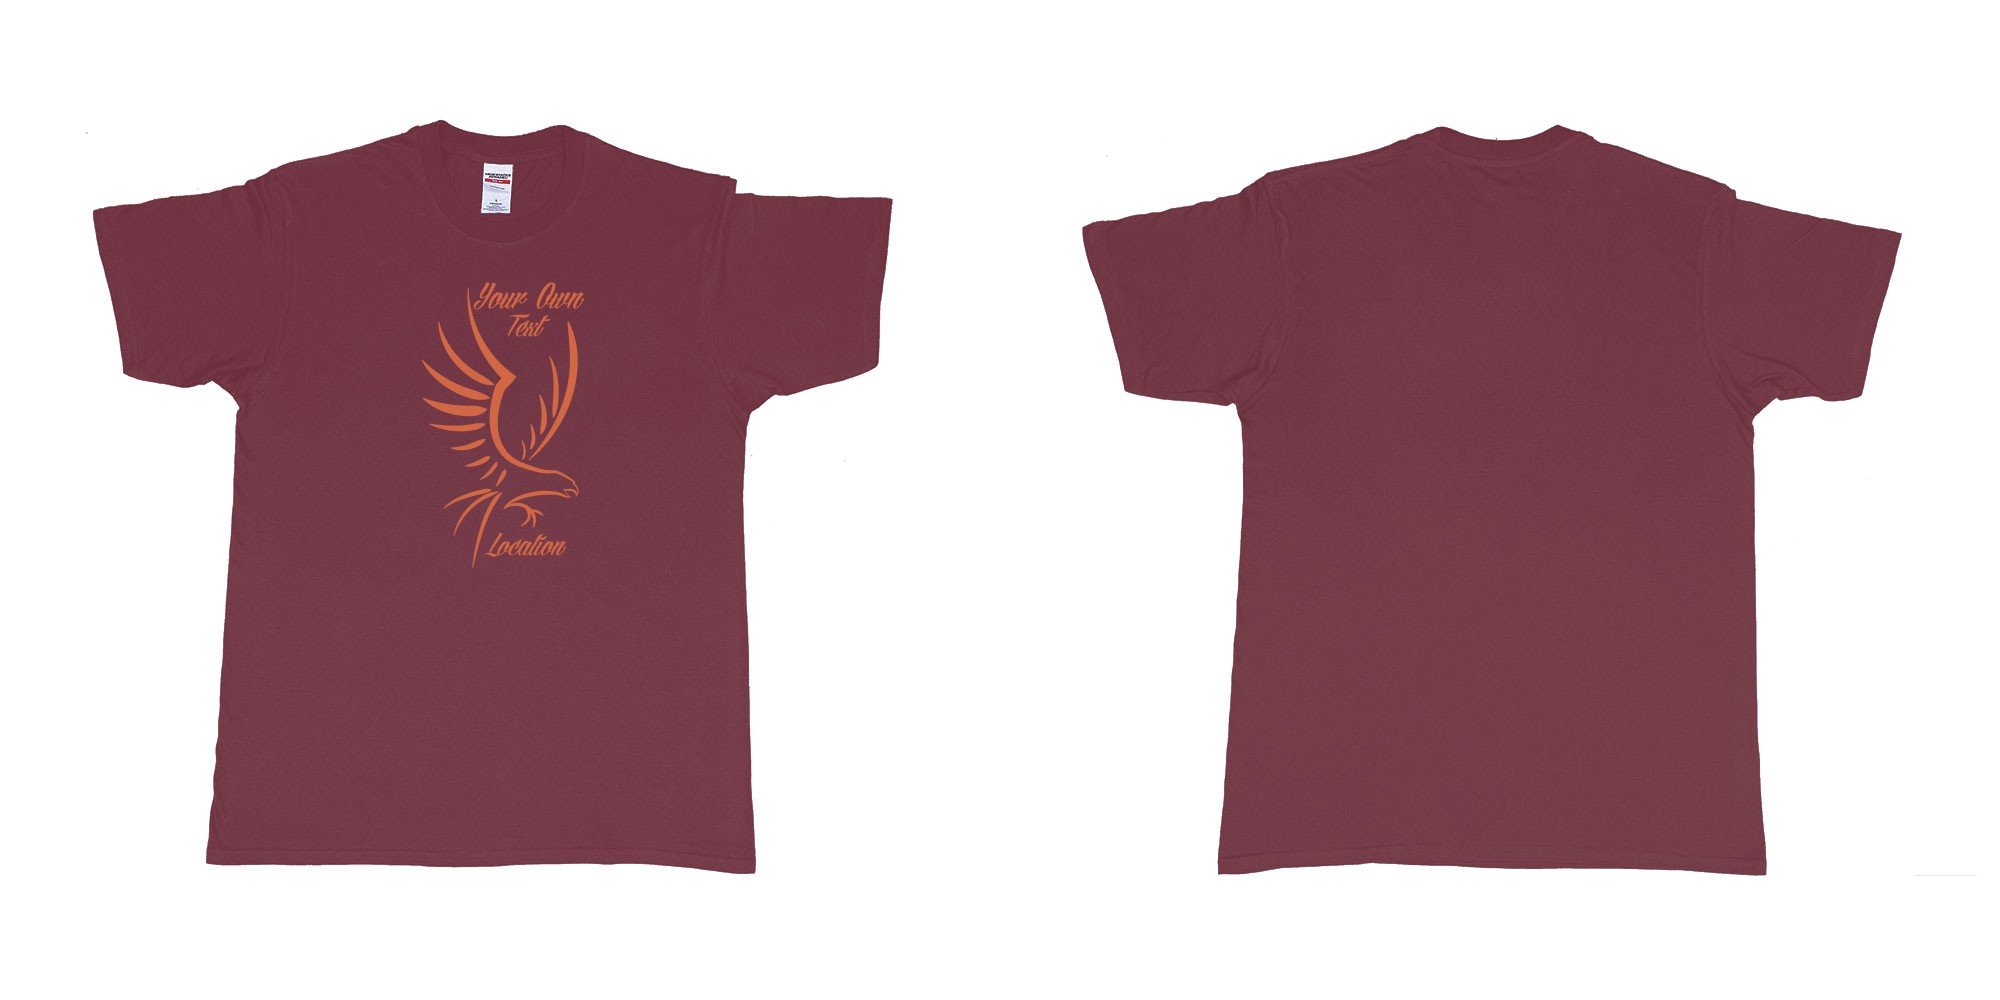 Custom tshirt design custom eagle drawing custom text in fabric color marron choice your own text made in Bali by The Pirate Way